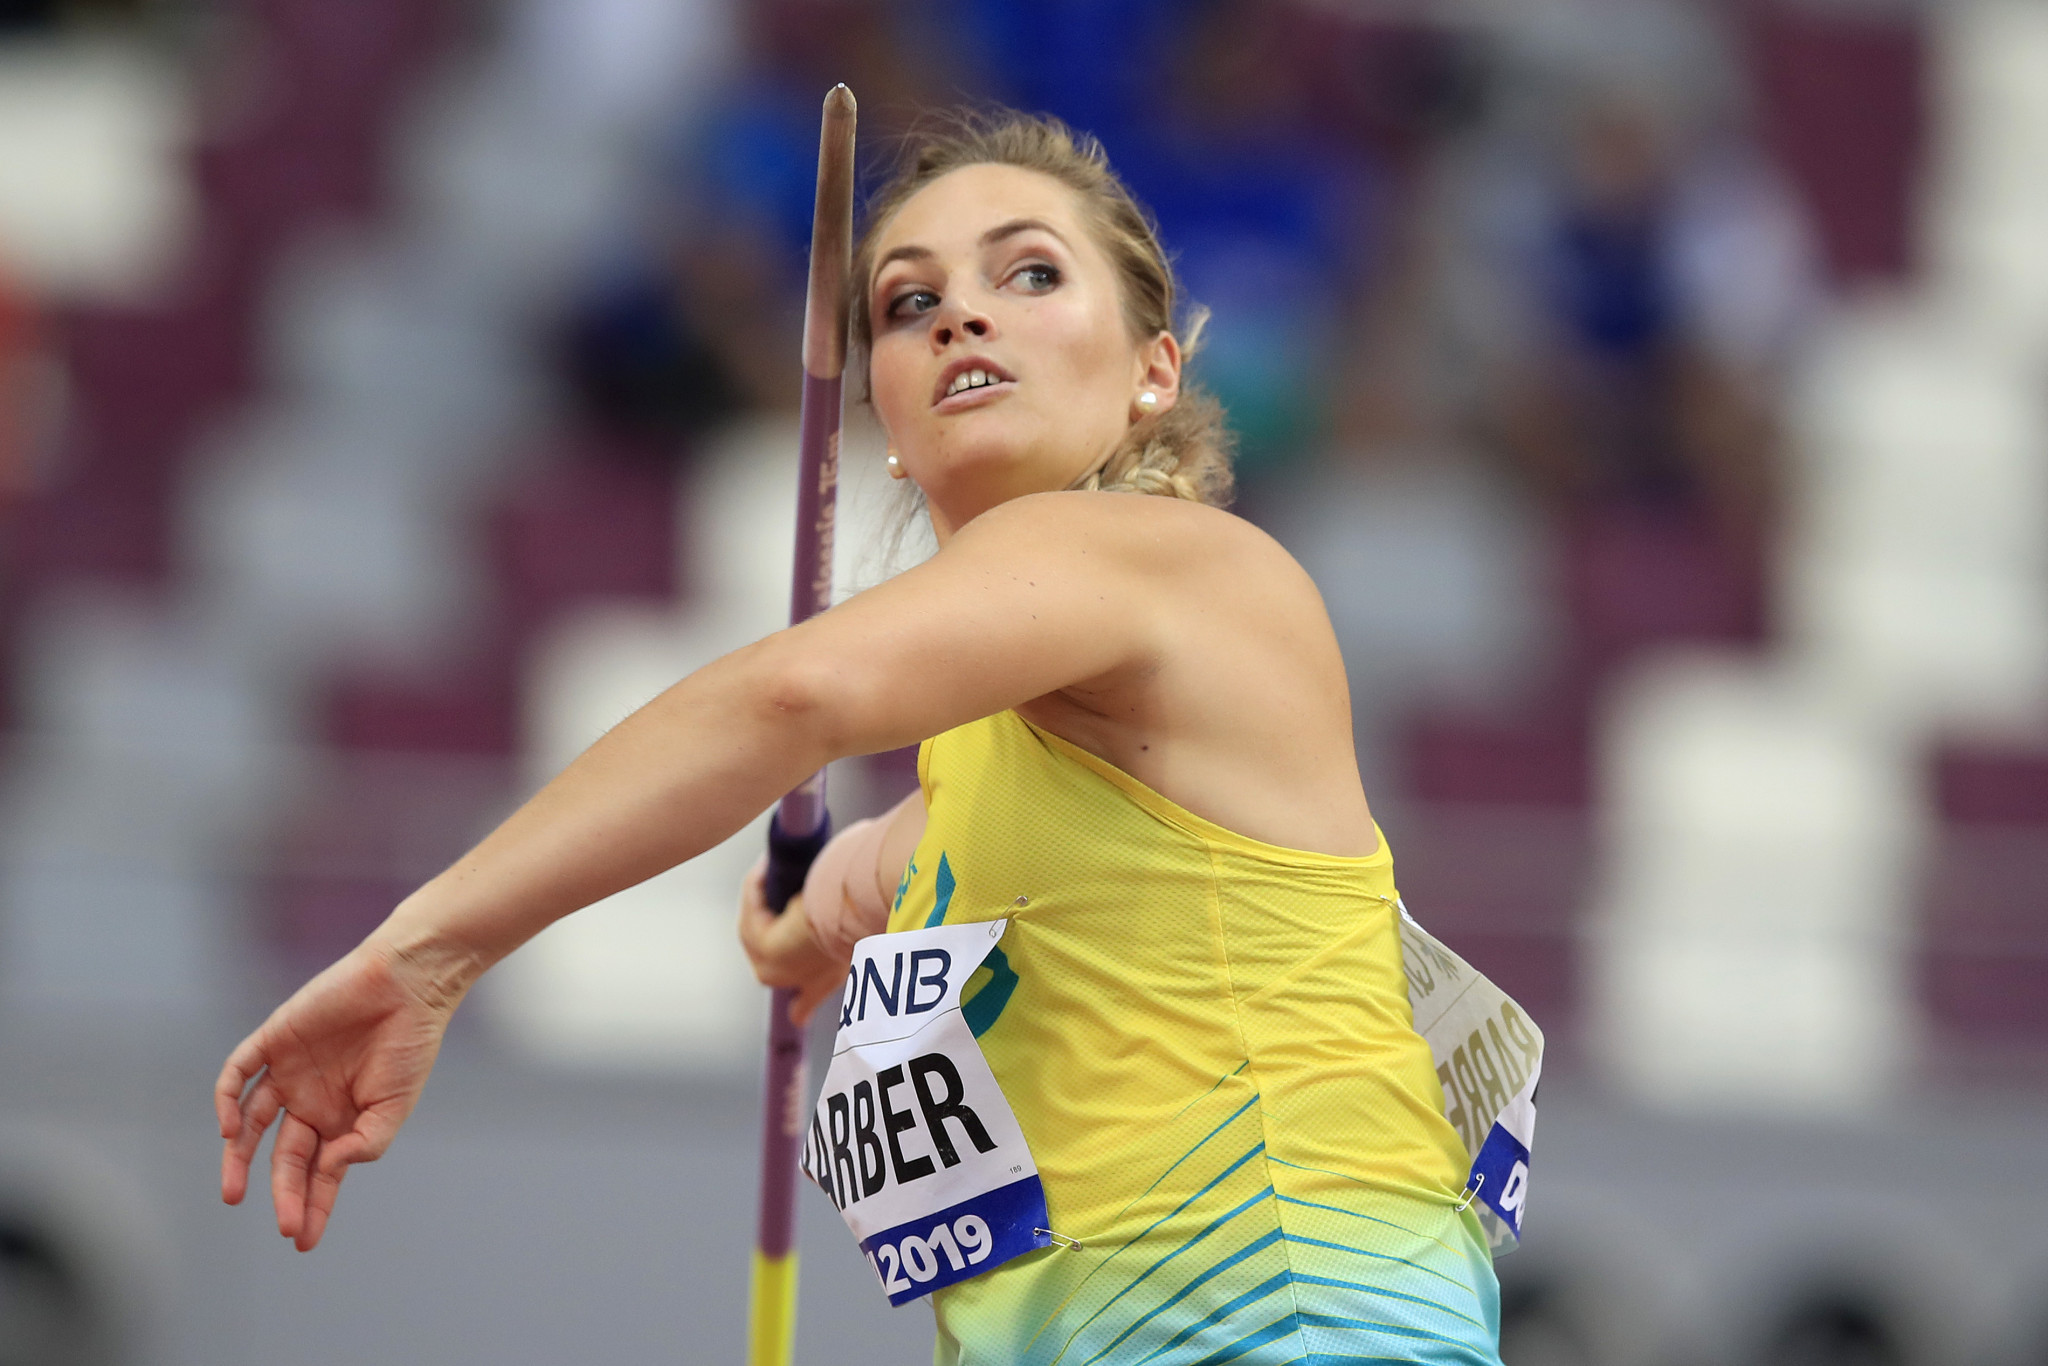 Australia's Kelsey-Lee Barber upset the form book to win the women's javelin ©Getty Images